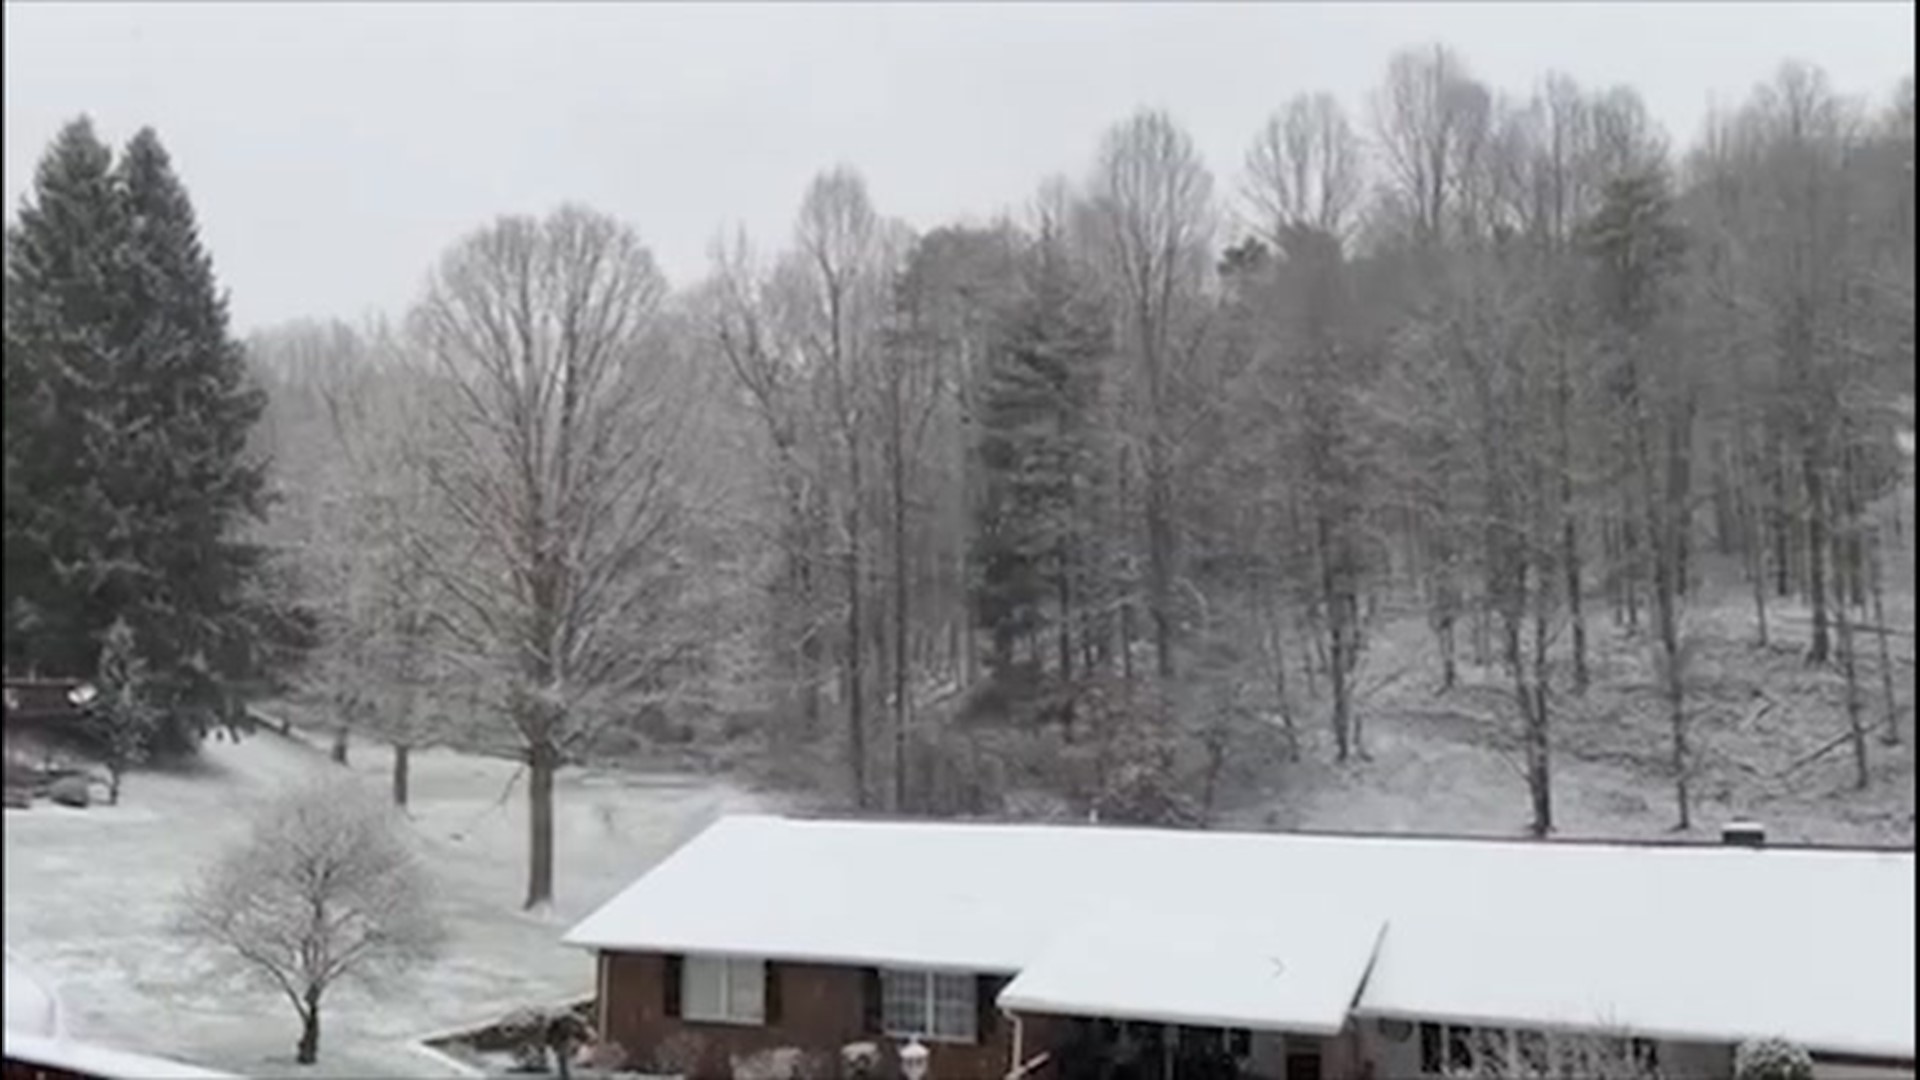 Snow coated the ground in Sissonville, West Virginia, early Saturday, Jan. 16, just north of Charleston.